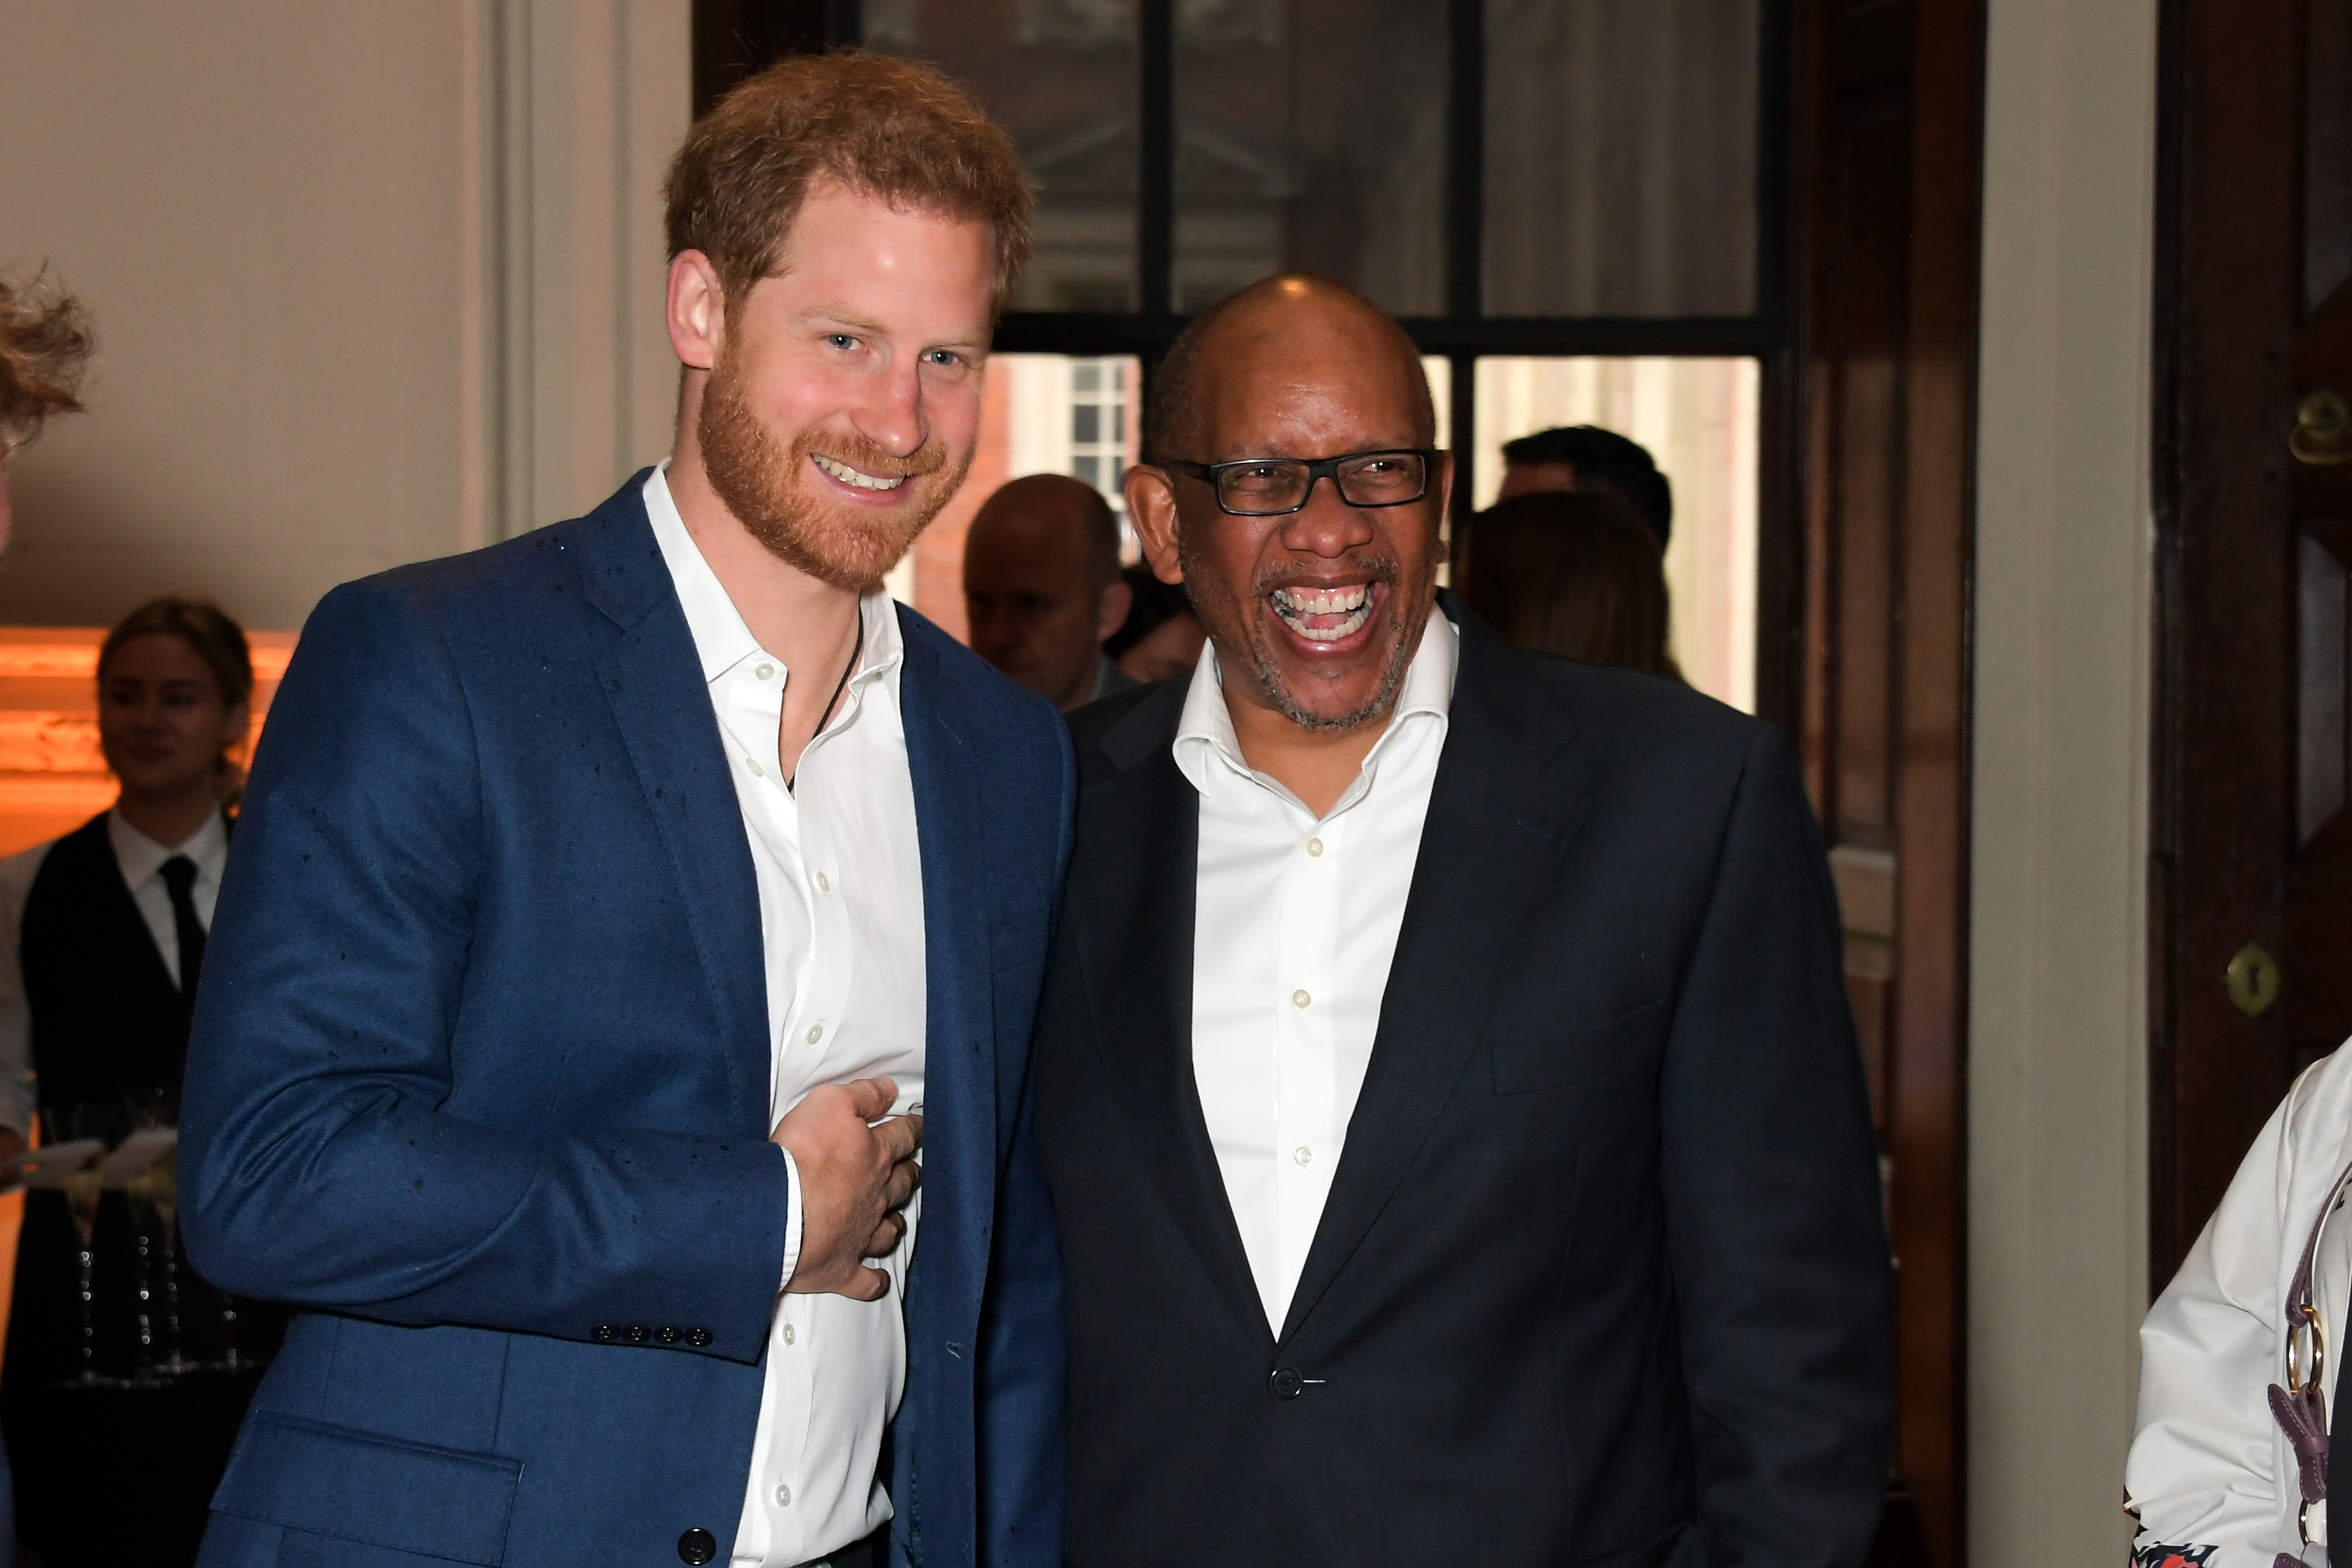 Prince Harry and Prince Seeiso at the Audi Sentebale Concert in London, England on June 11, 2019 | Source: Getty Images